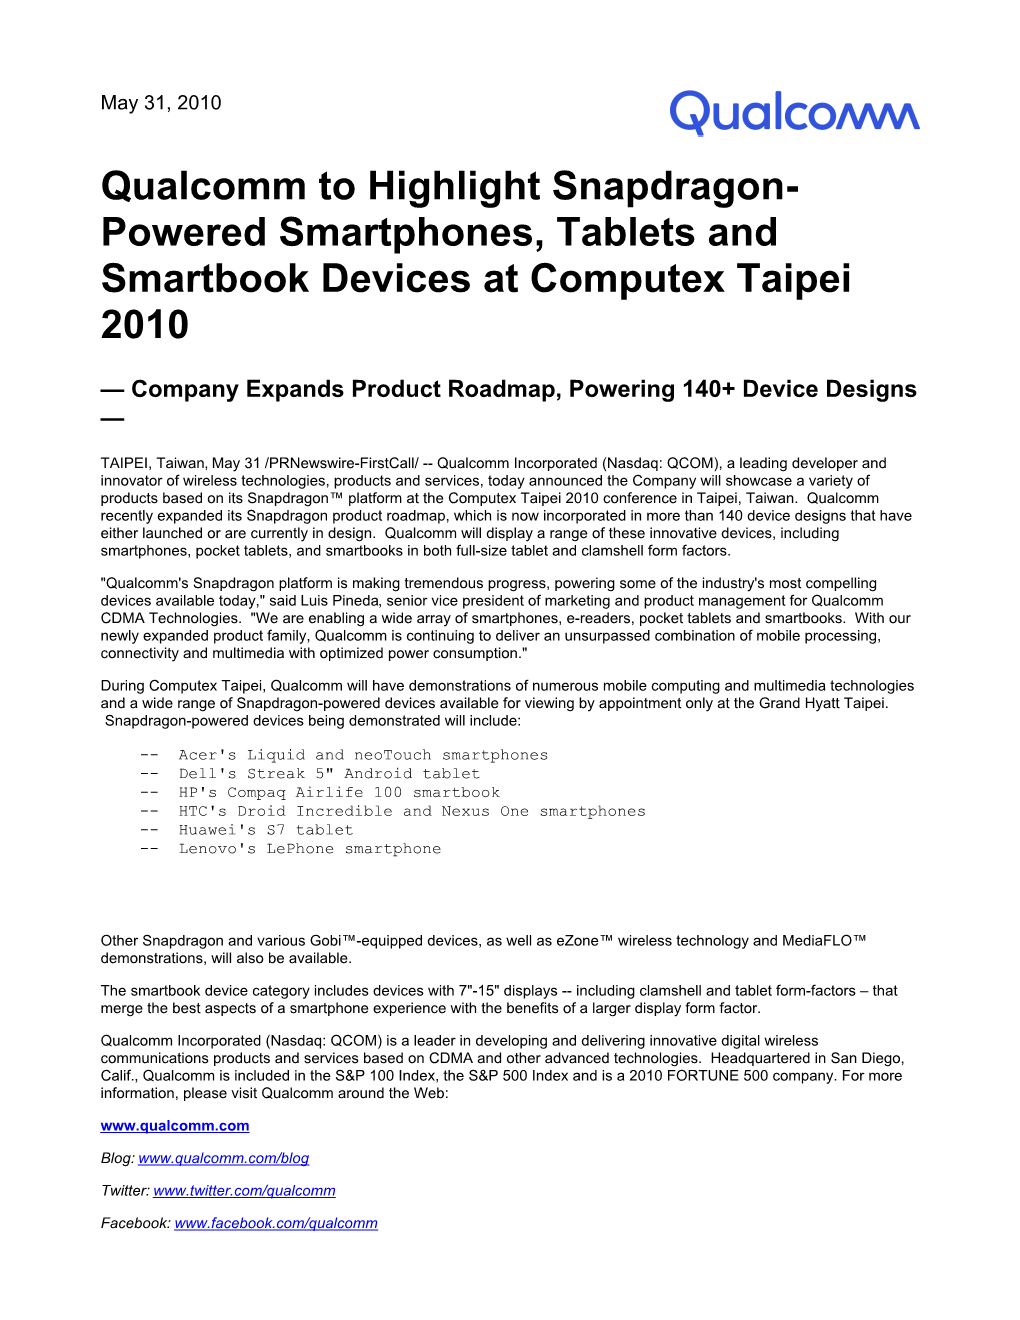 Qualcomm to Highlight Snapdragon- Powered Smartphones, Tablets and Smartbook Devices at Computex Taipei 2010